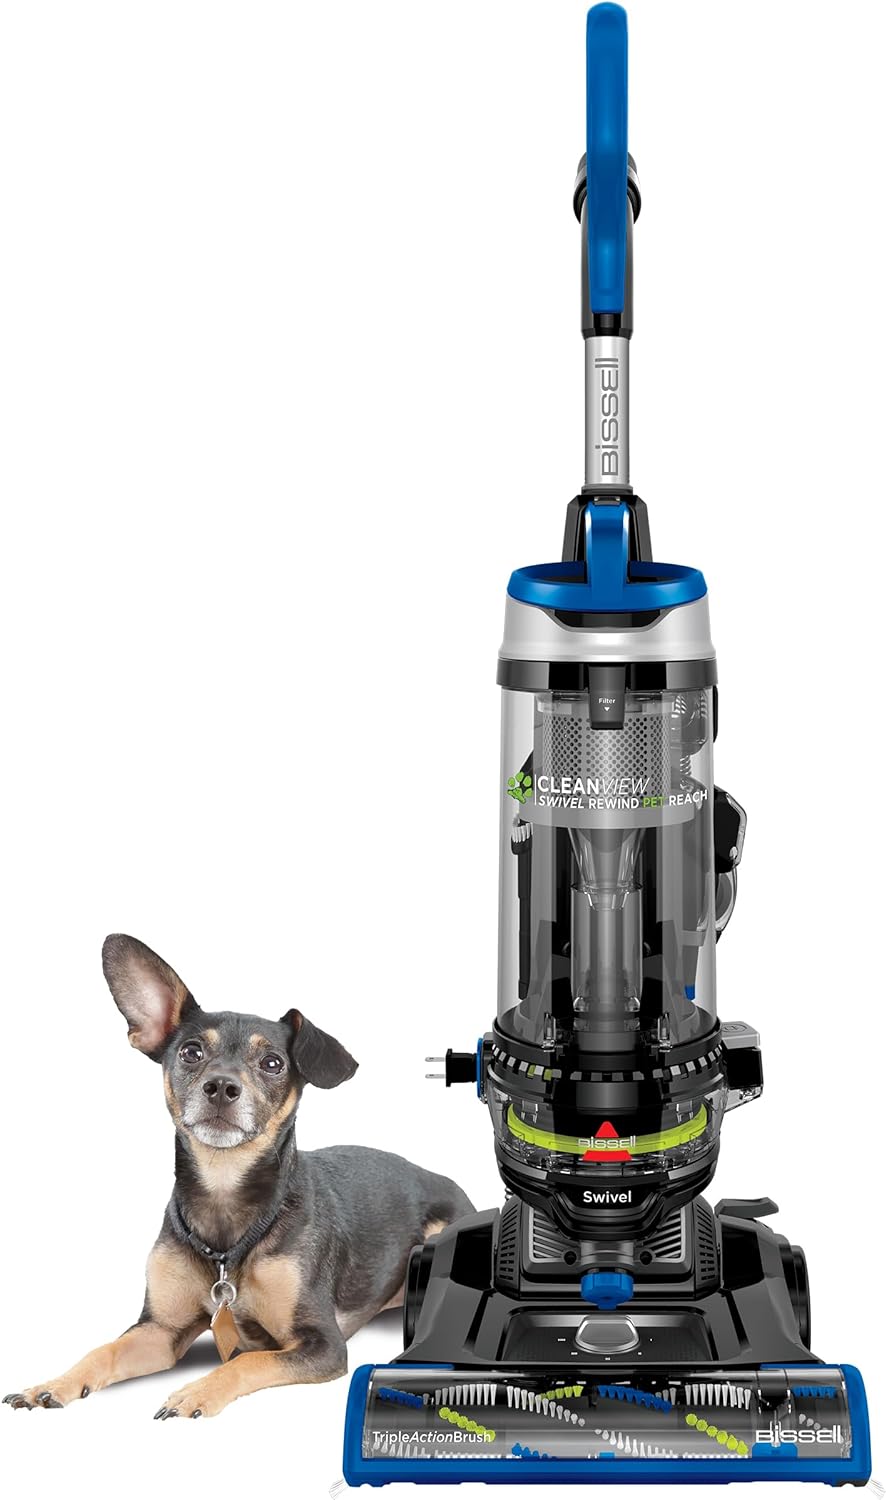 Bissell CleanView Swivel Rewind Pet Reach Vacuum Cleaner, with Quick Release Wand, Swivel Steering and Automatic Cord Rewind, 3197A (Color may vary),Black